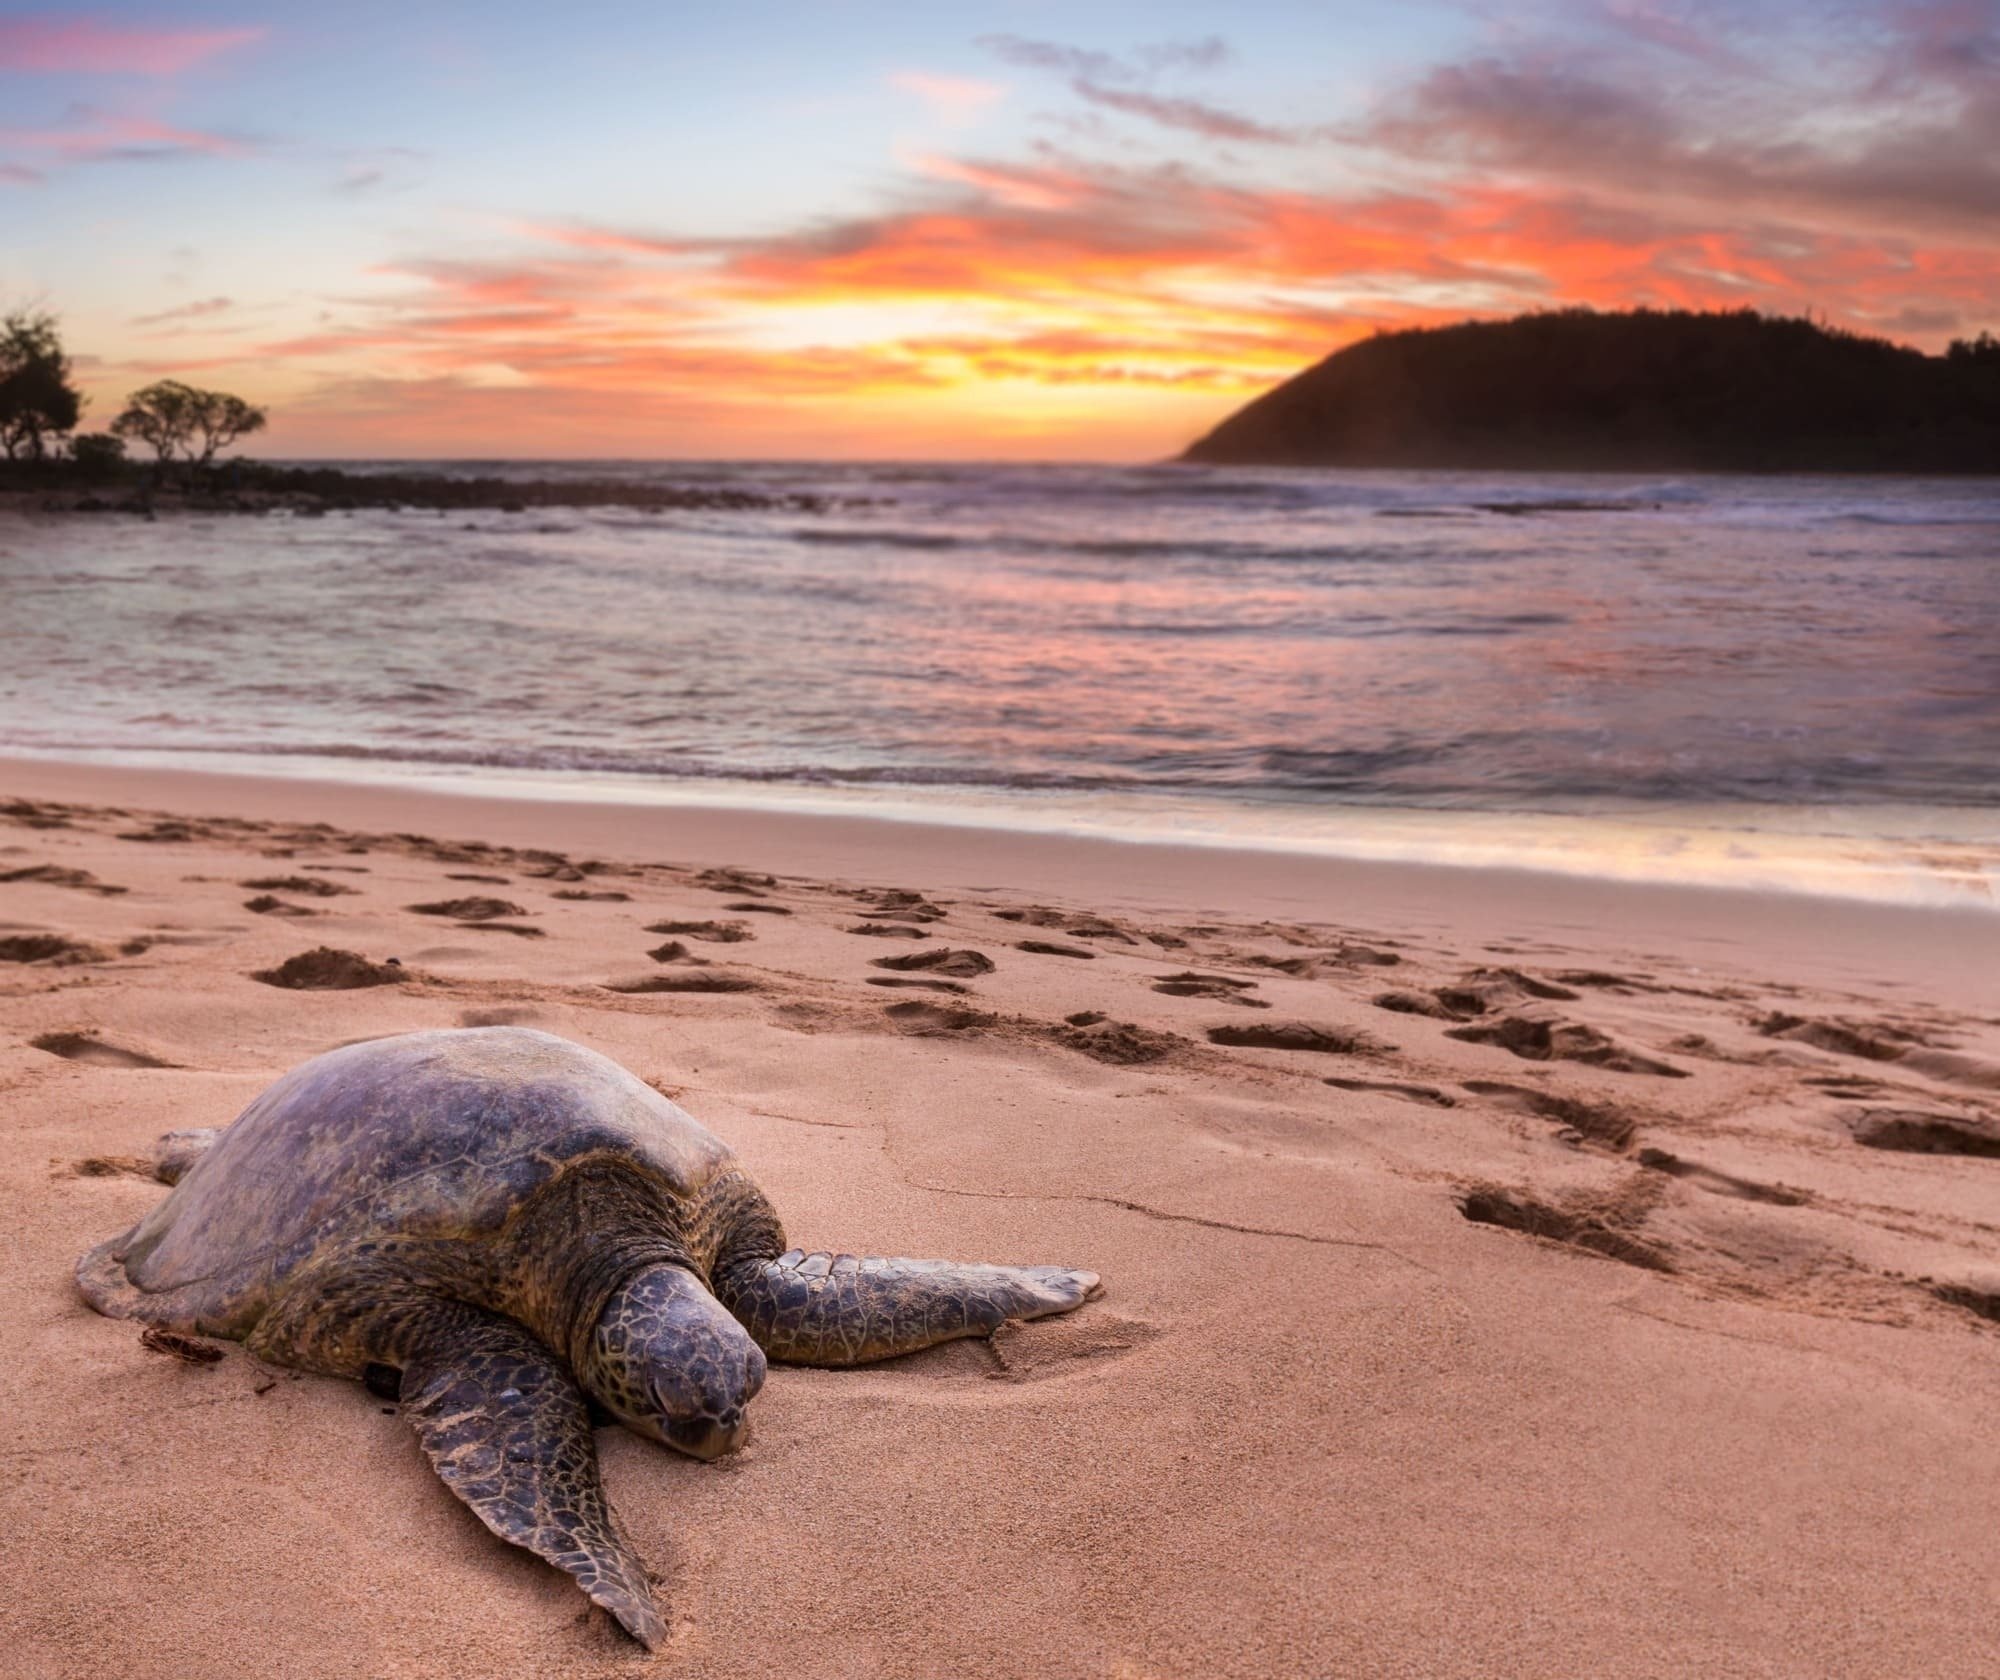 a sea turtle is laying on the beach at sunset